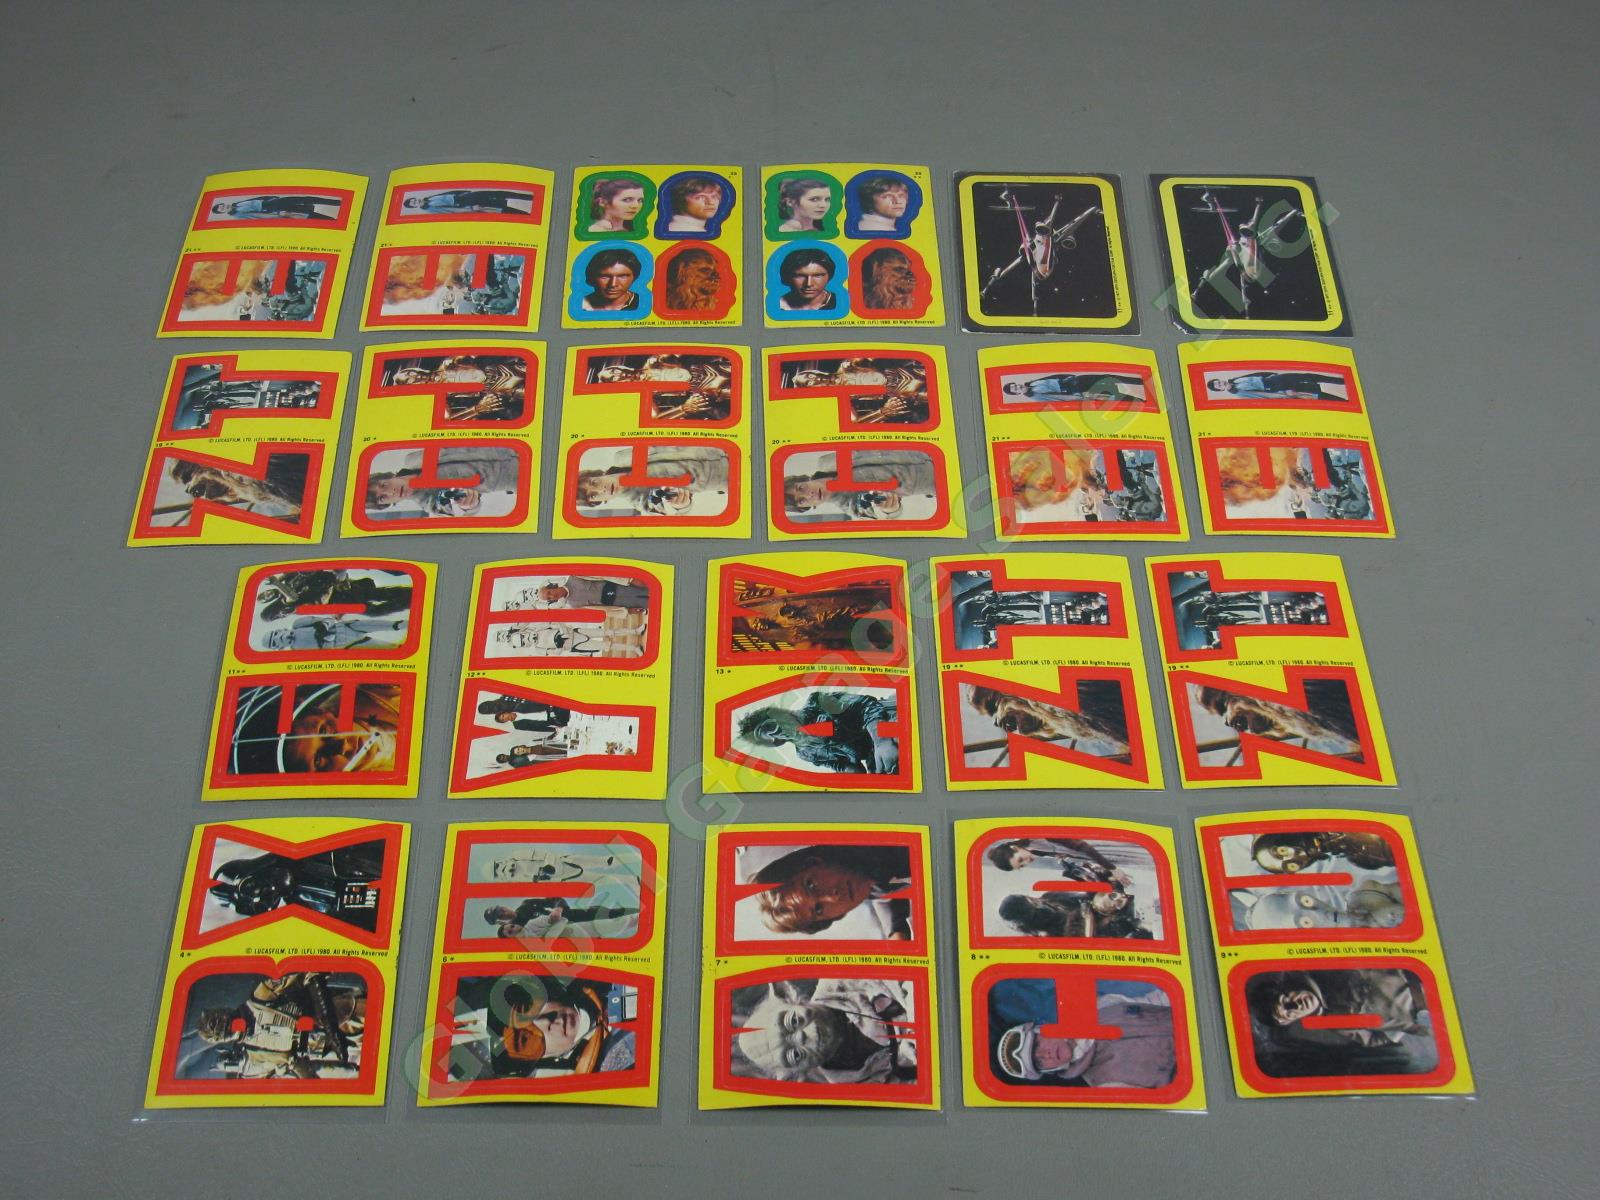 121 Topps Star Wars Sticker Cards Lot 1977 Series 1 2 3 4 5 Empire Strikes Back 6